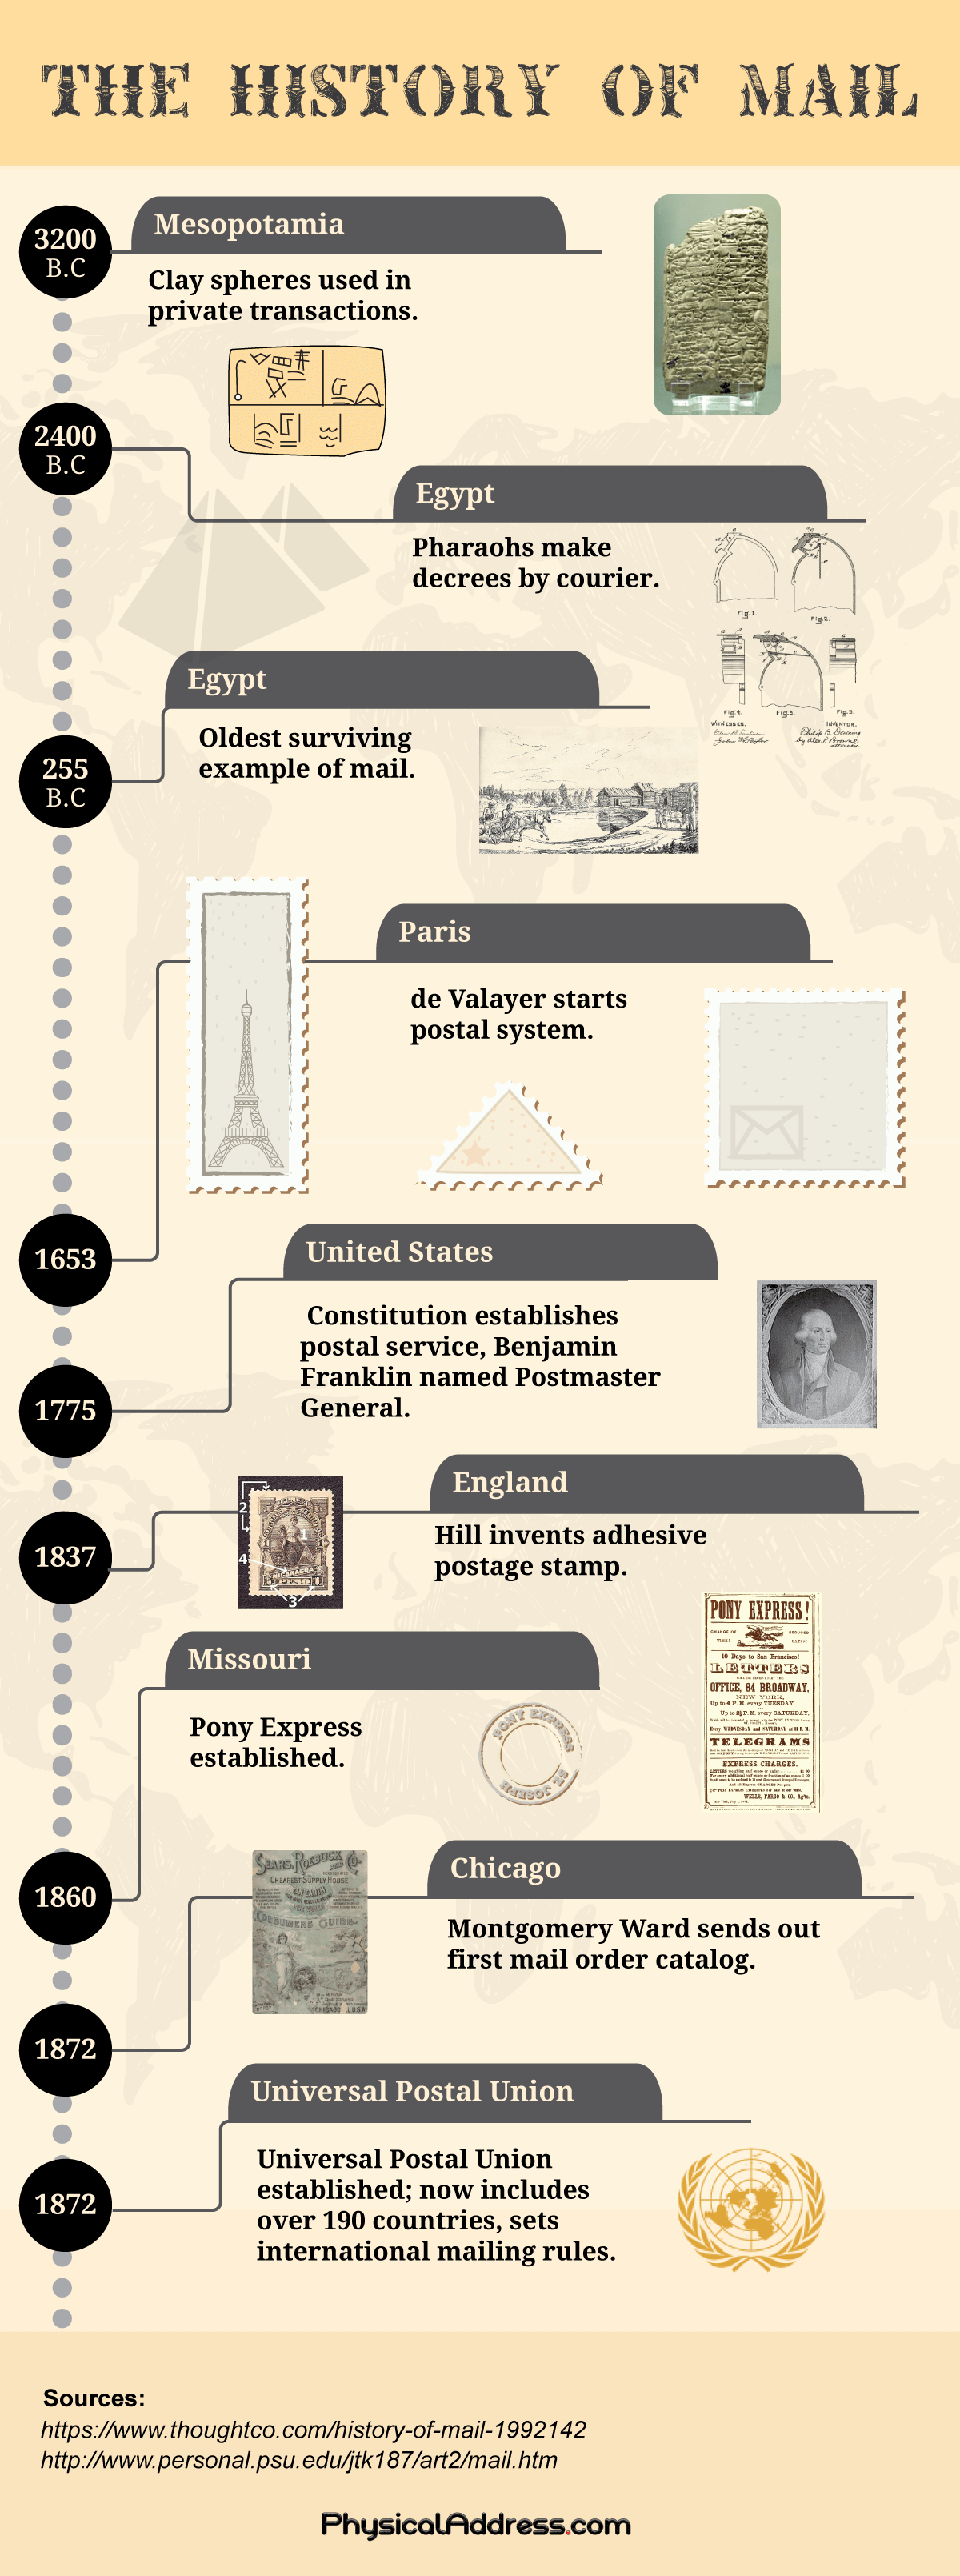 PhysicalAddress.com History of Postal Mail Infographic